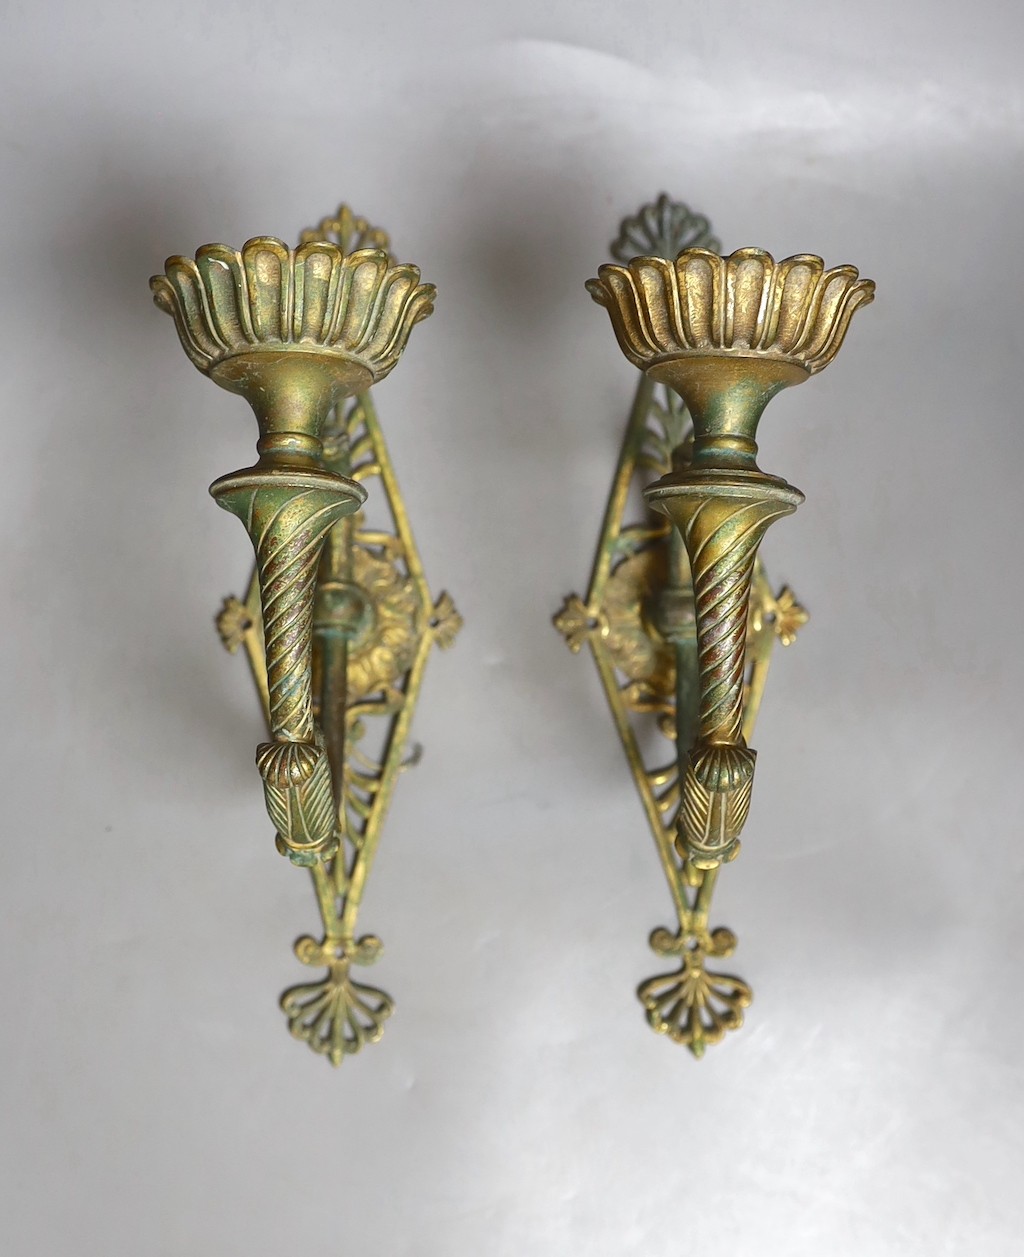 A pair of Grecian revival brass wall sconces, 30.5 cms high.